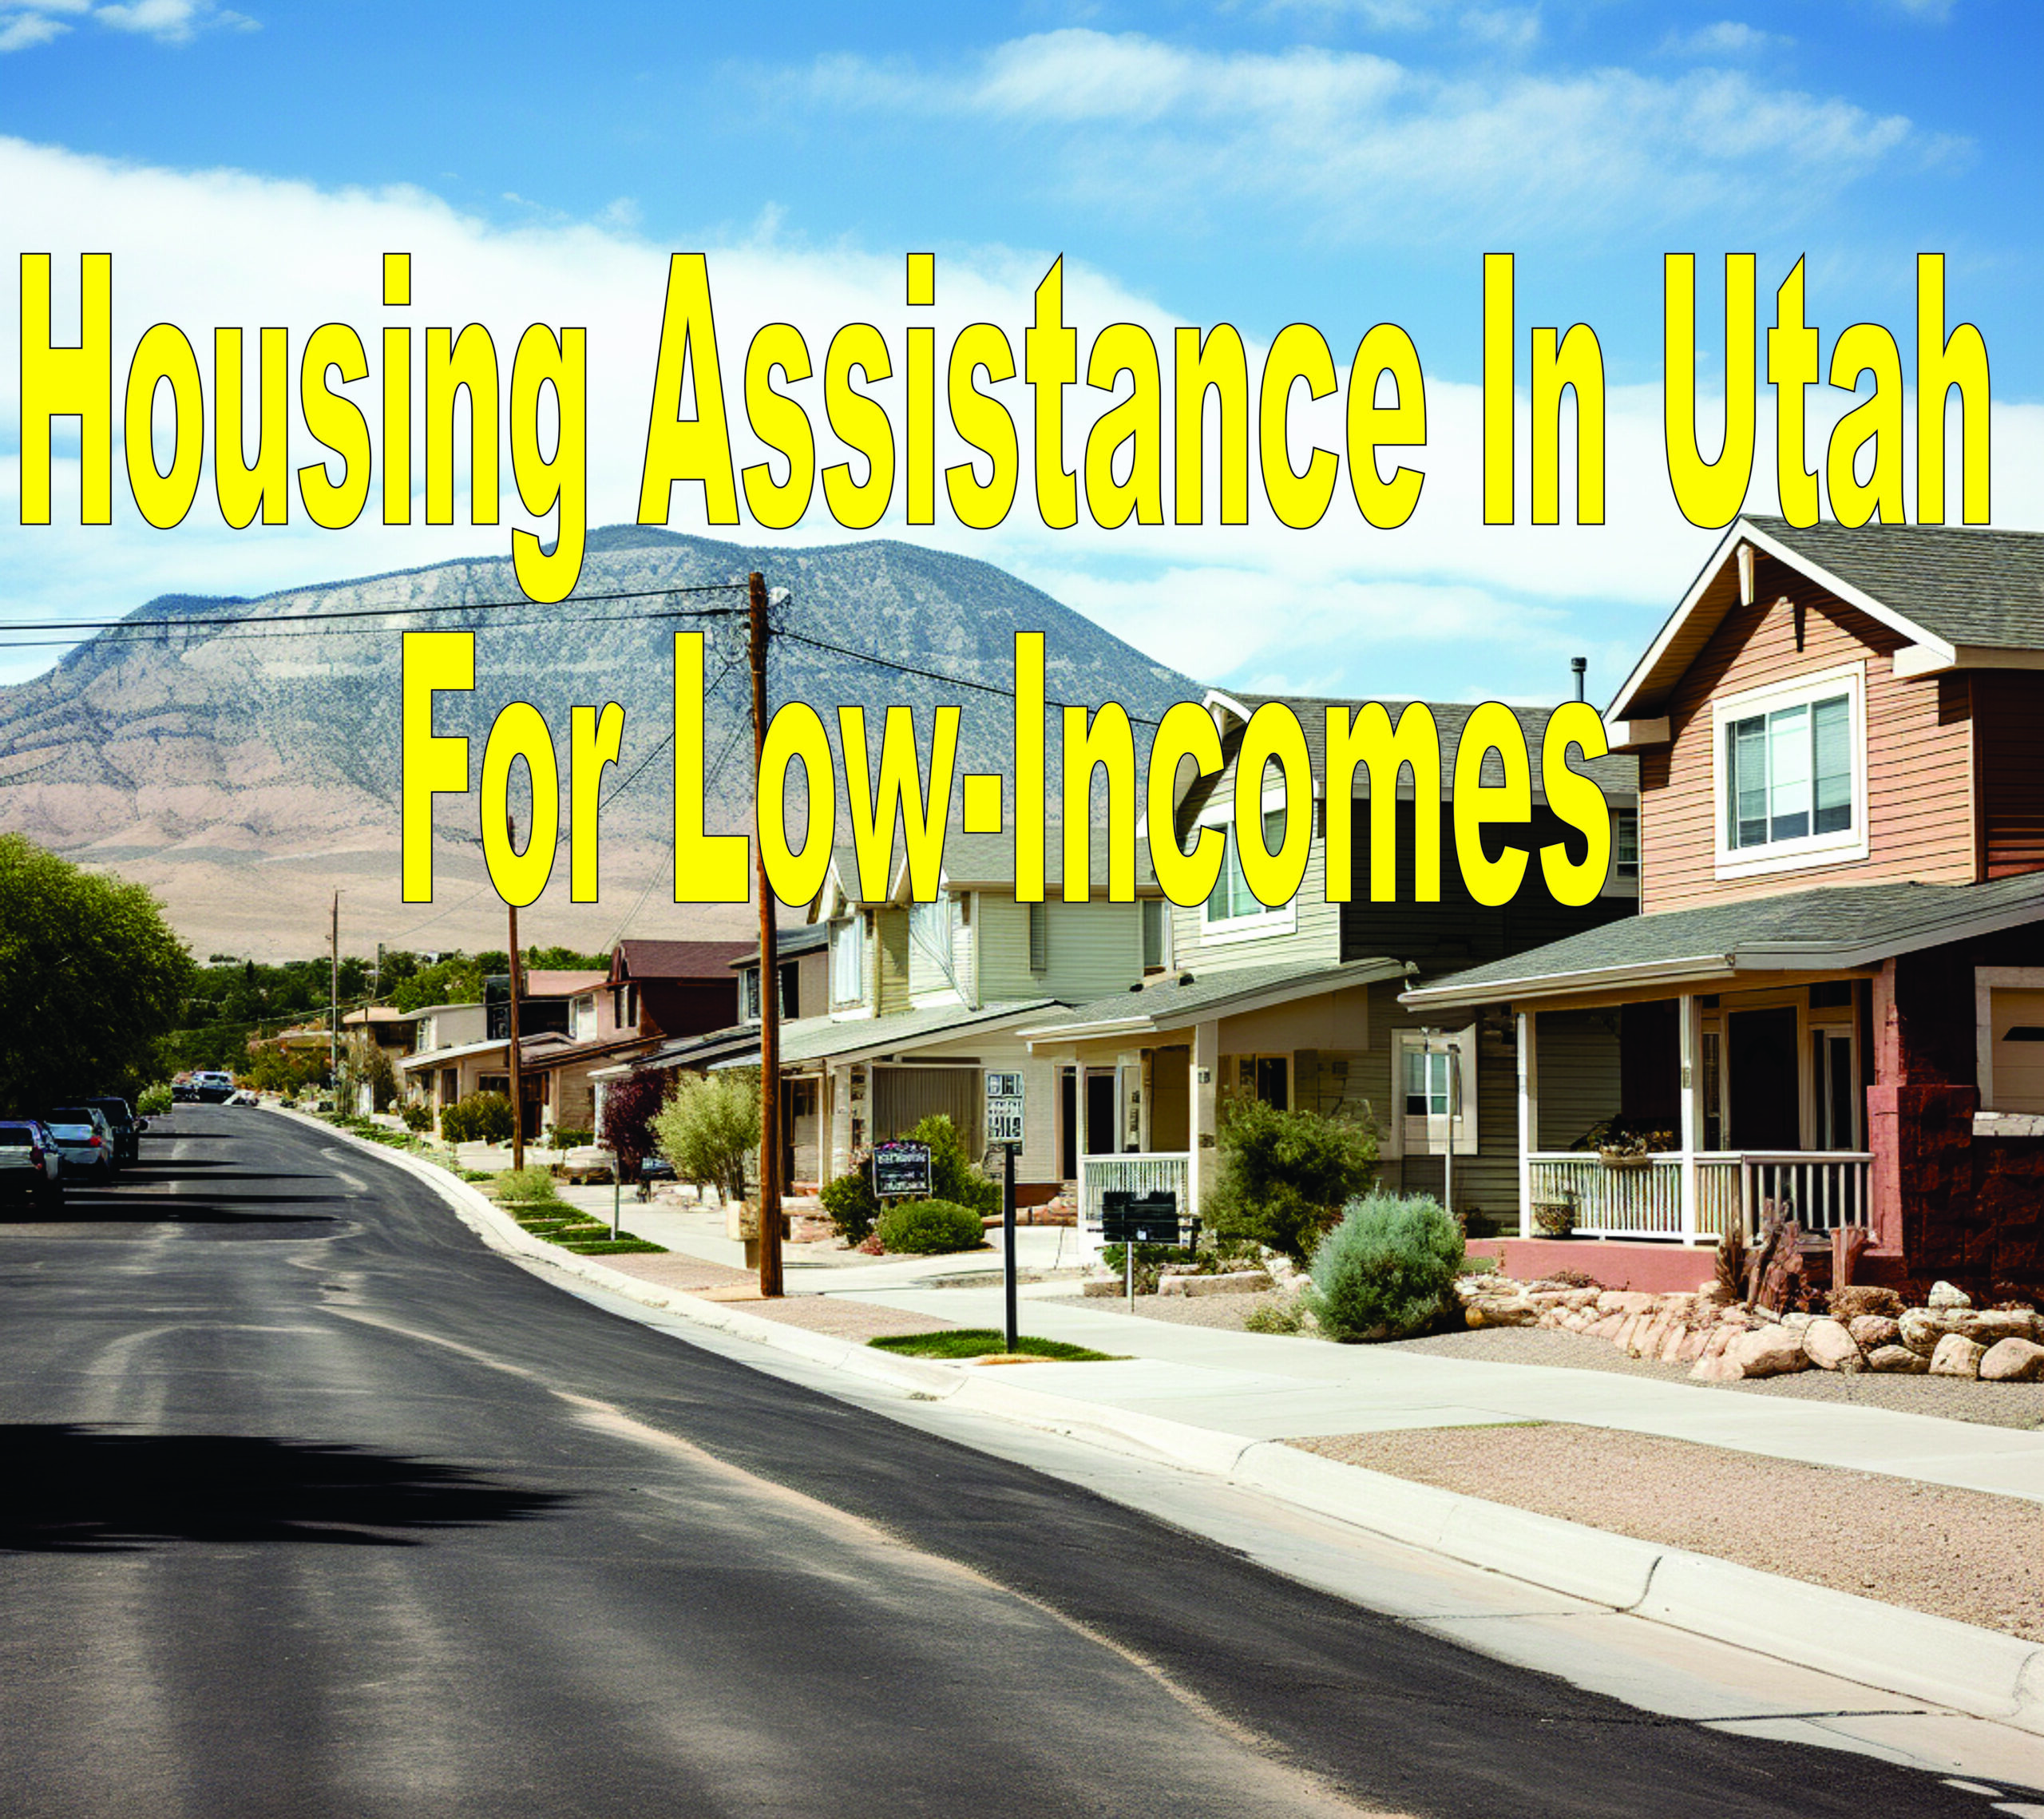 Housing Assistance In Utah For Low Incomes